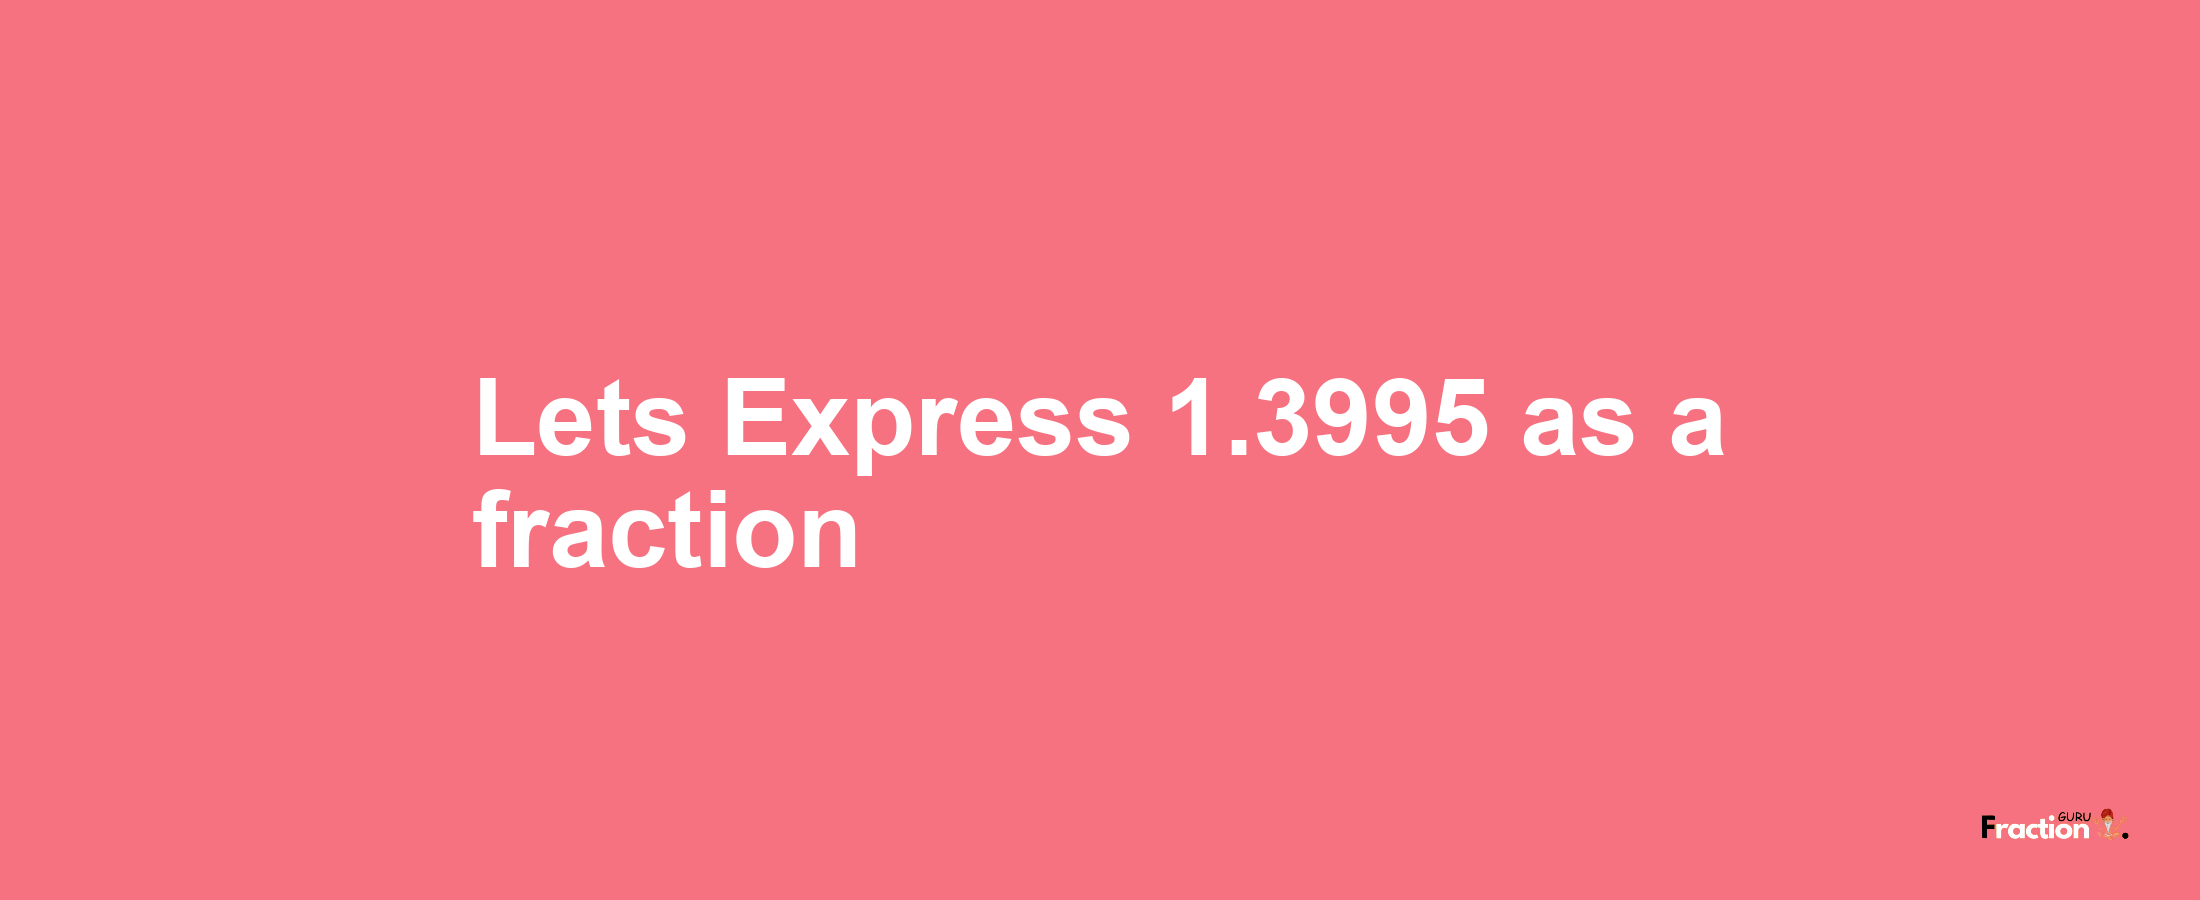 Lets Express 1.3995 as afraction